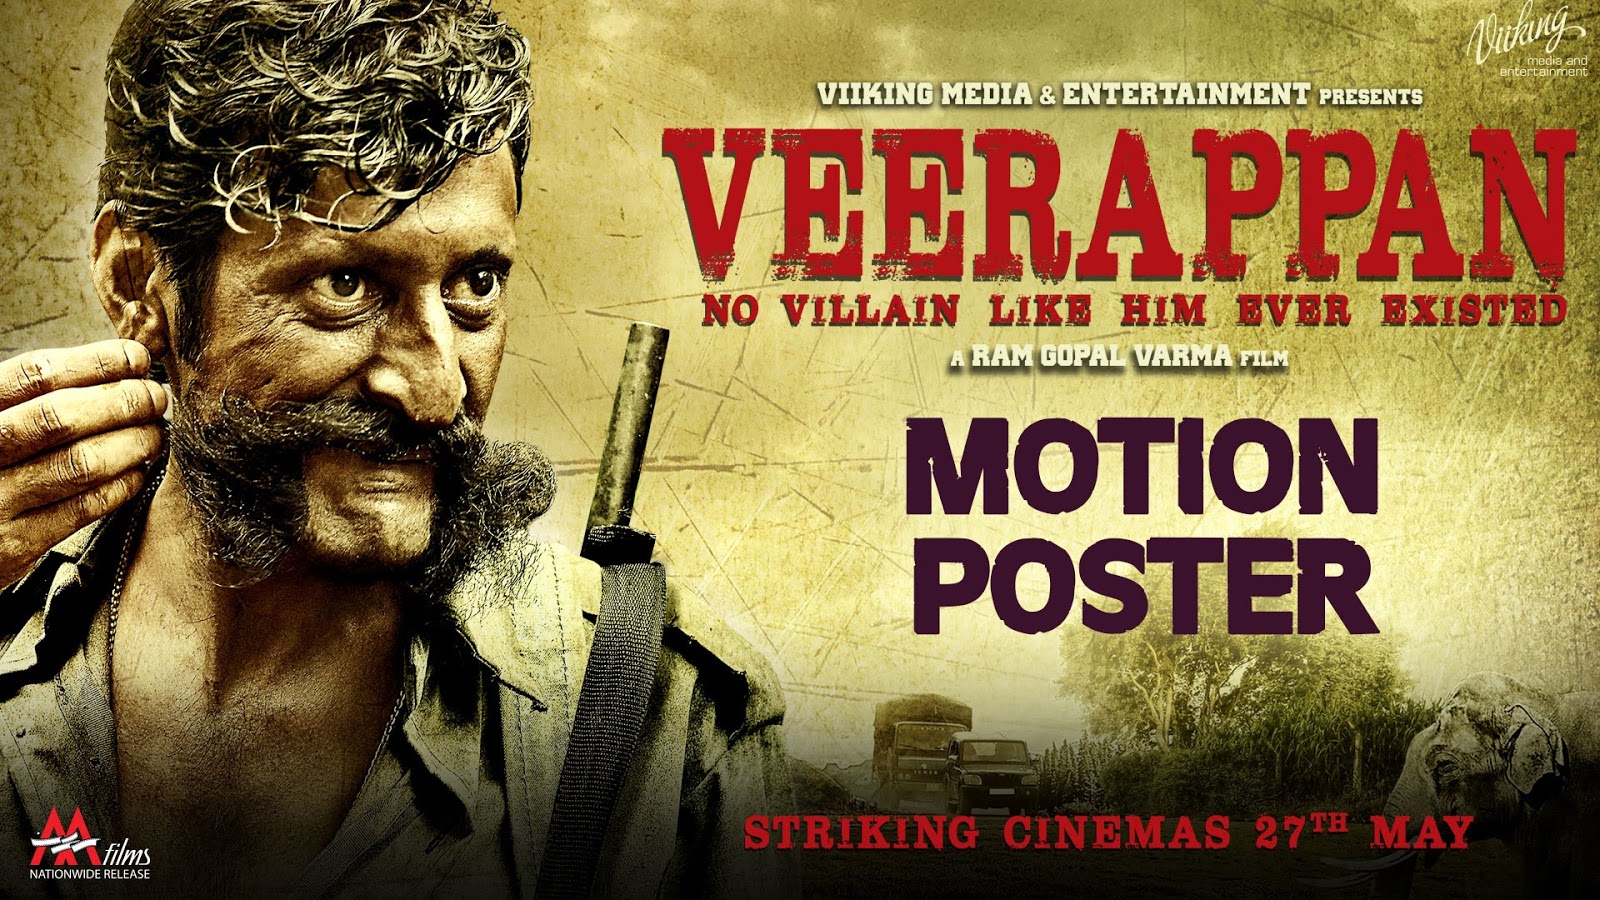 Complete Cast And Crew Of Veerappan Bollywood Hindi - Veerappan Movie Poster - HD Wallpaper 